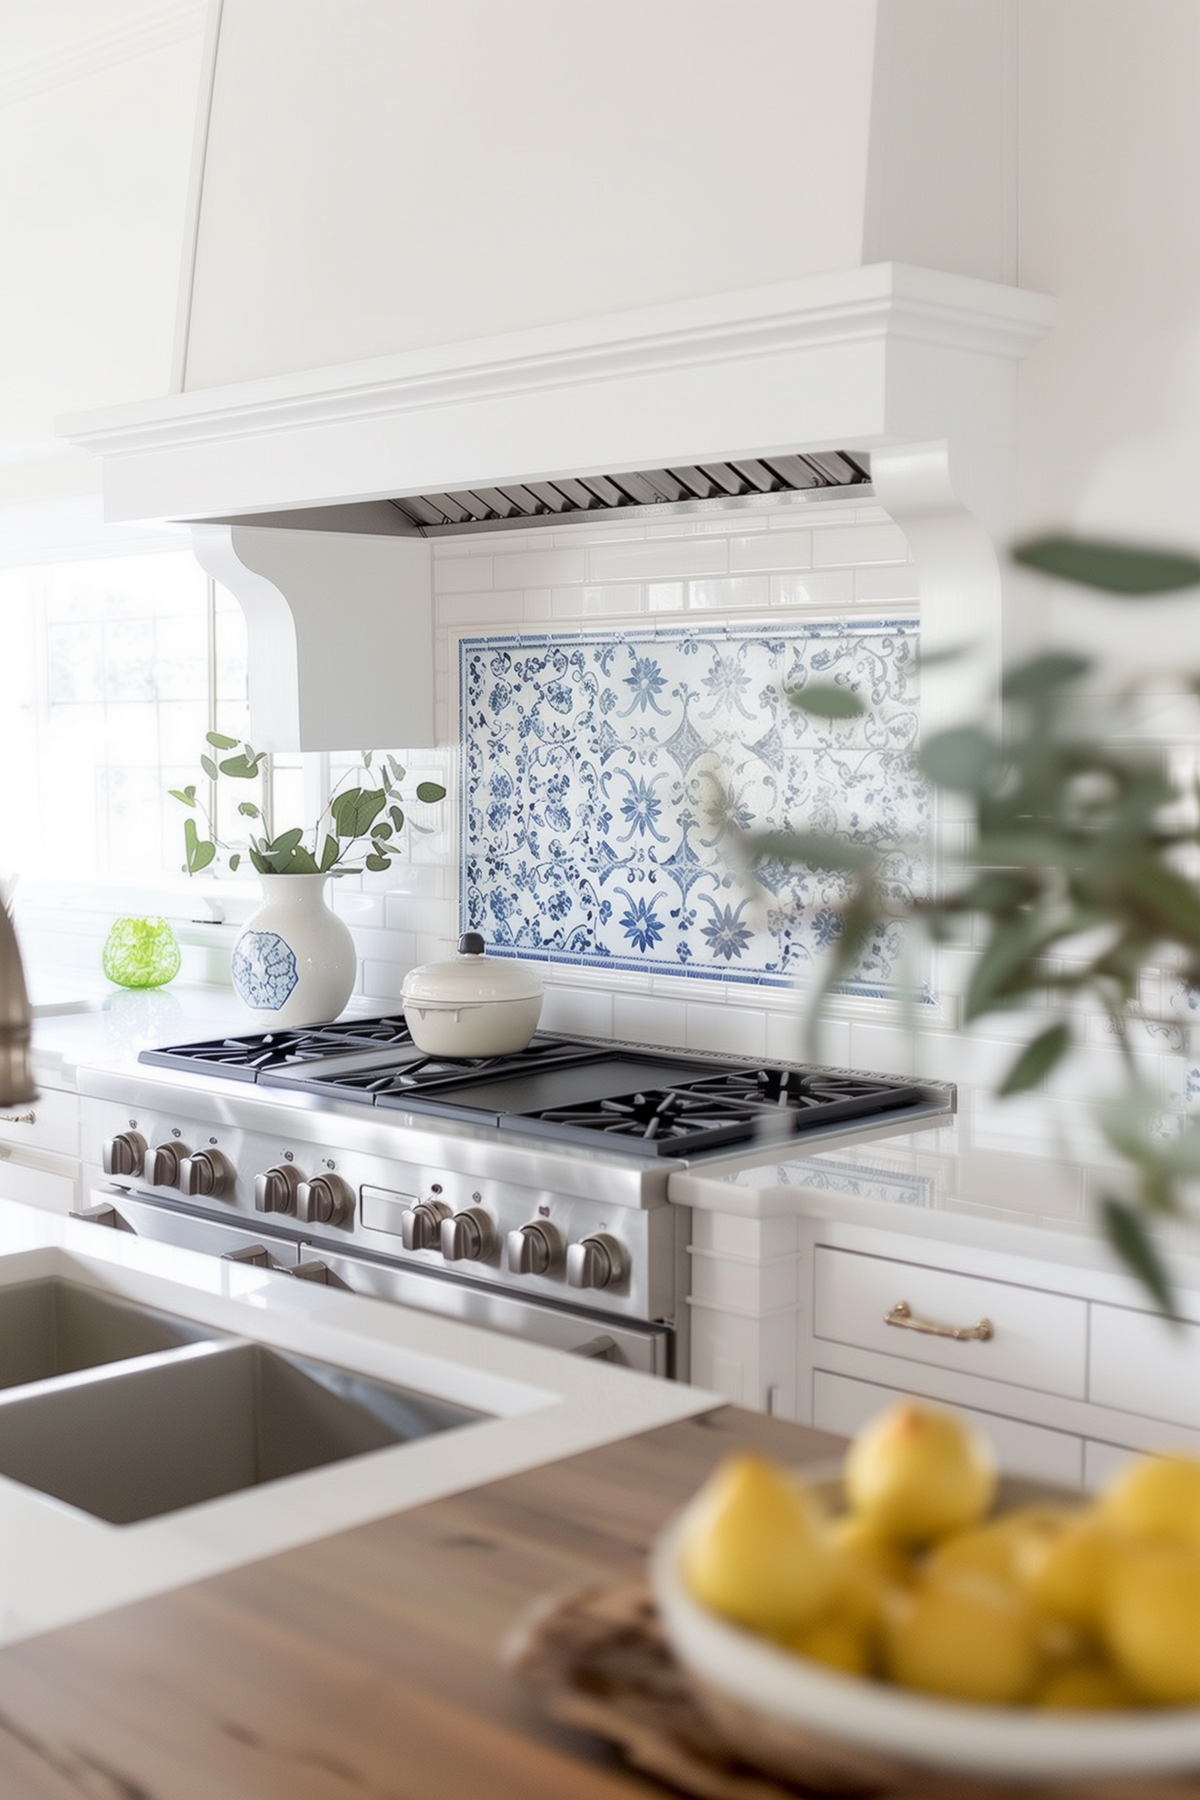 all white kitchen with white subway tile backsplash and blue Moroccan style tile inlay behind the range.